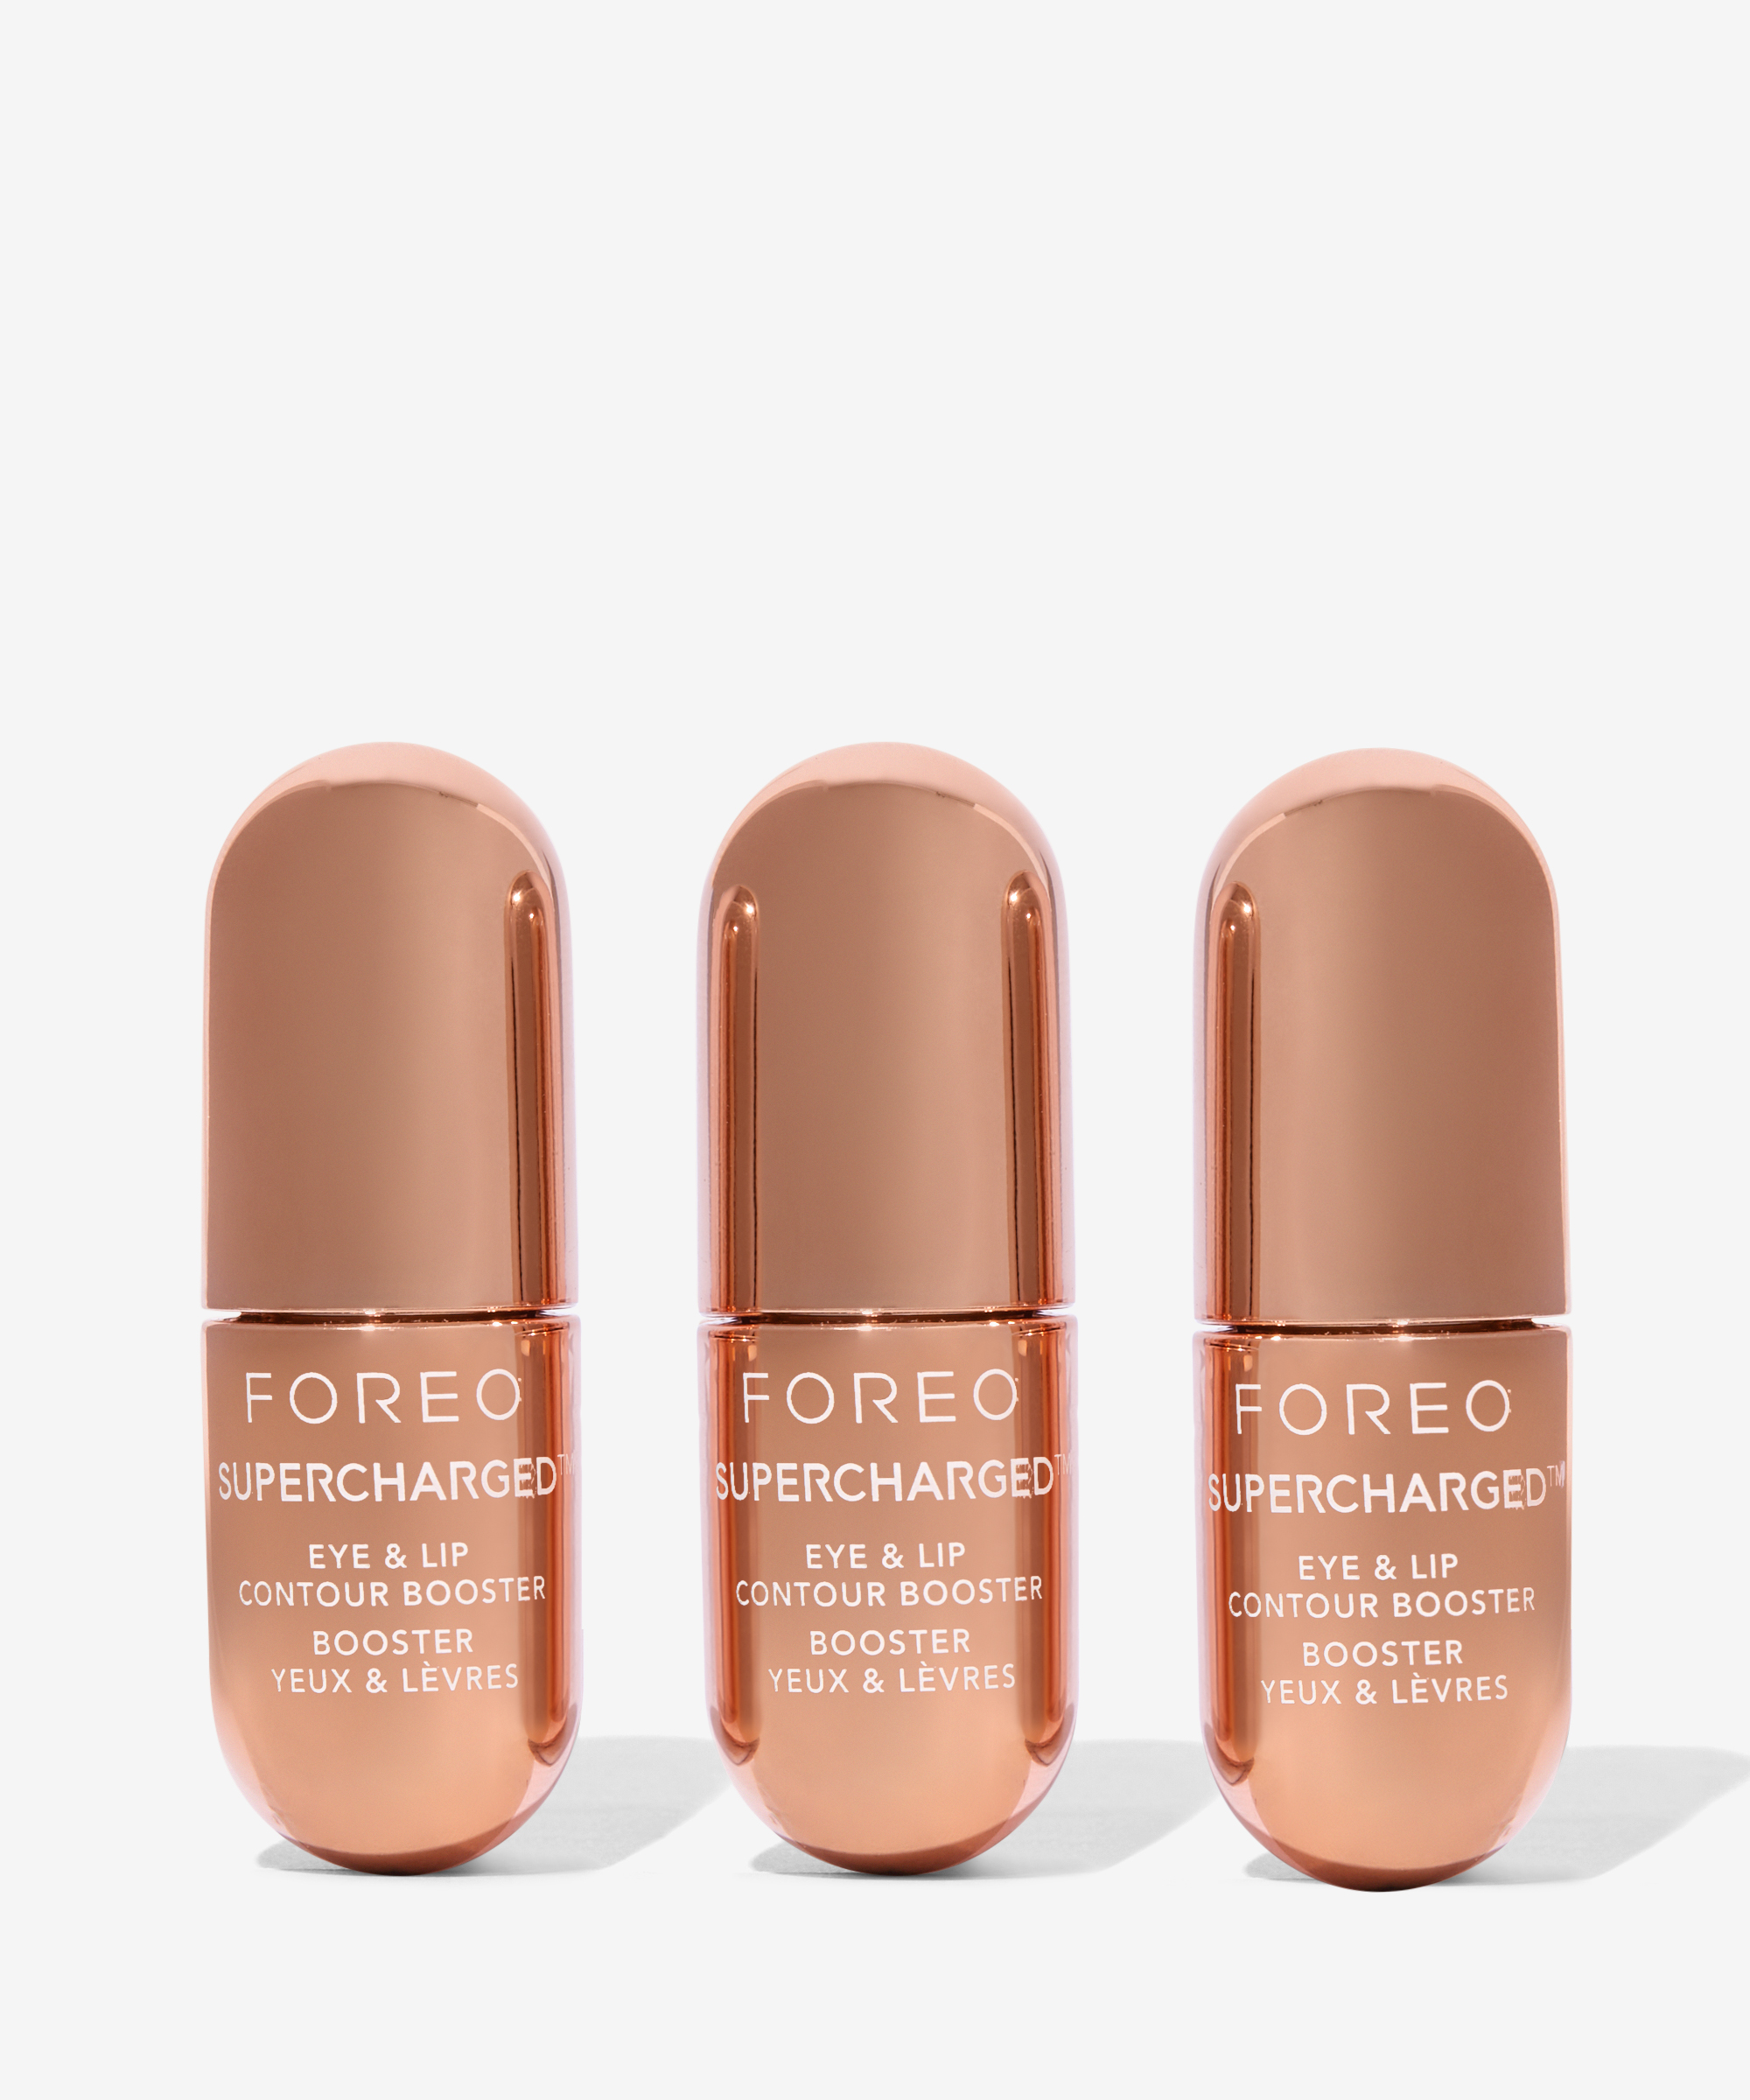 Foreo Supercharged Eye & Lip Contour Booster at BEAUTY BAY